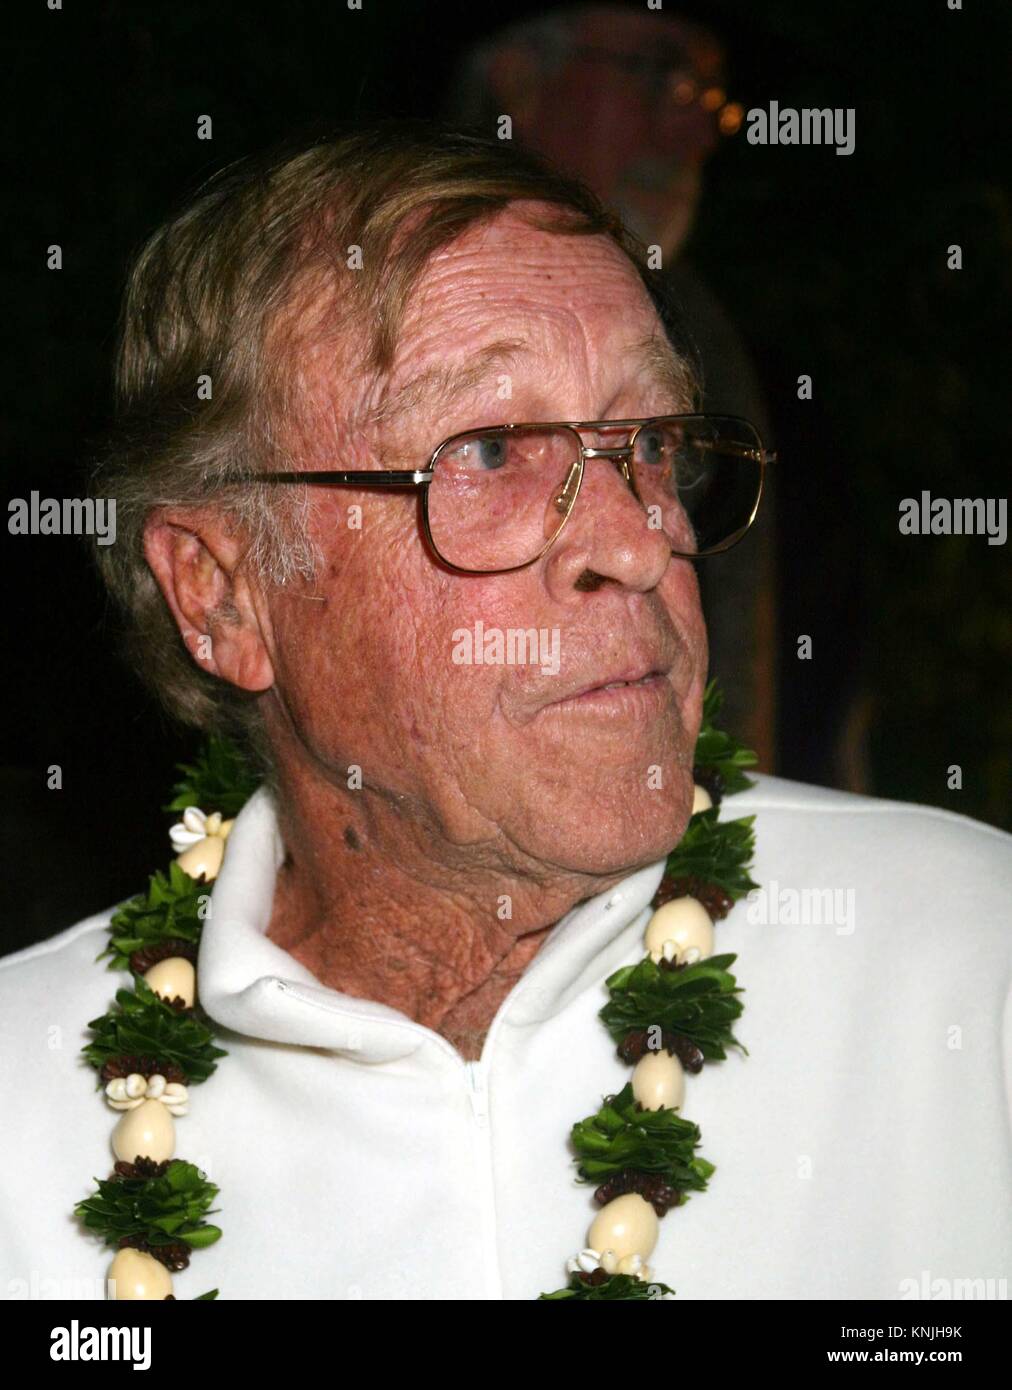 Apr 16, 2004; Newport Beach, CA, USA; Legendary Surfer/Director BRUCE BROWN celebrates the 40th Anniversary of his surfing film 'The Endless Summer' during the Newport Beach Film Festival Credit: Krista Kennell/ZUMAPRESS.com/Alamy Live News Stock Photo